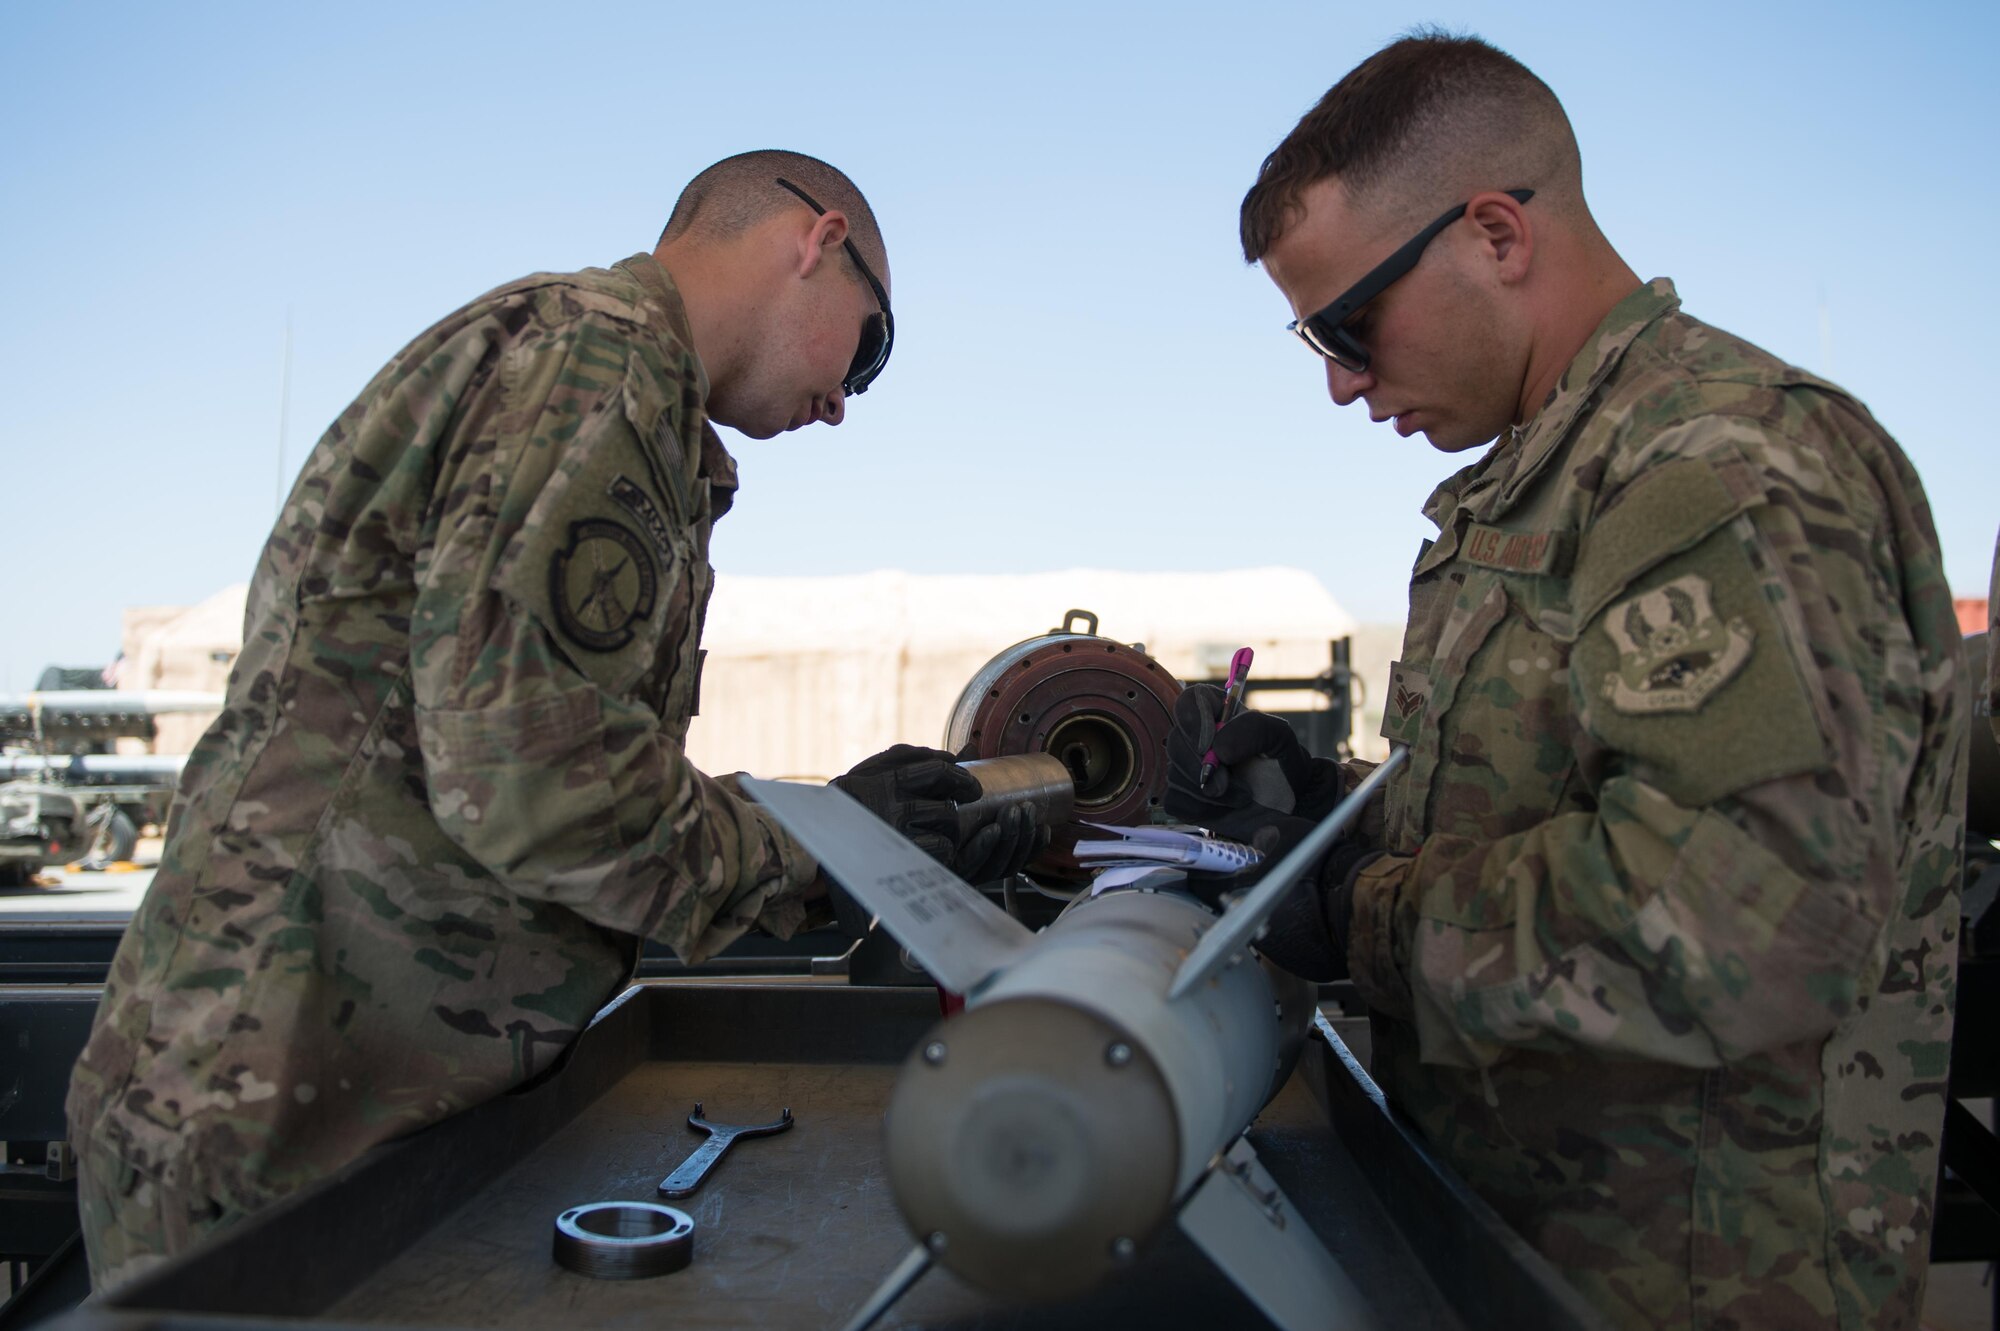 U.S. Air Force Senior Airman Michael Rose, right, and Airman 1st Class James Griffin, both assigned to the 455th Expeditionary Maintenance Squadron Munitions Flight, complete a six month inspection on a Guided Bomb Unit-54 (GBU-54) munition at Bagram Airfield, Afghanistan, June 15, 2015. The 455th EMXS Munitions Flight ensures that every munition loaded onto an F-16 Fighting Falcon will perform as expected when used. (U.S. Air Force photo by Tech. Sgt. Joseph Swafford/Released)